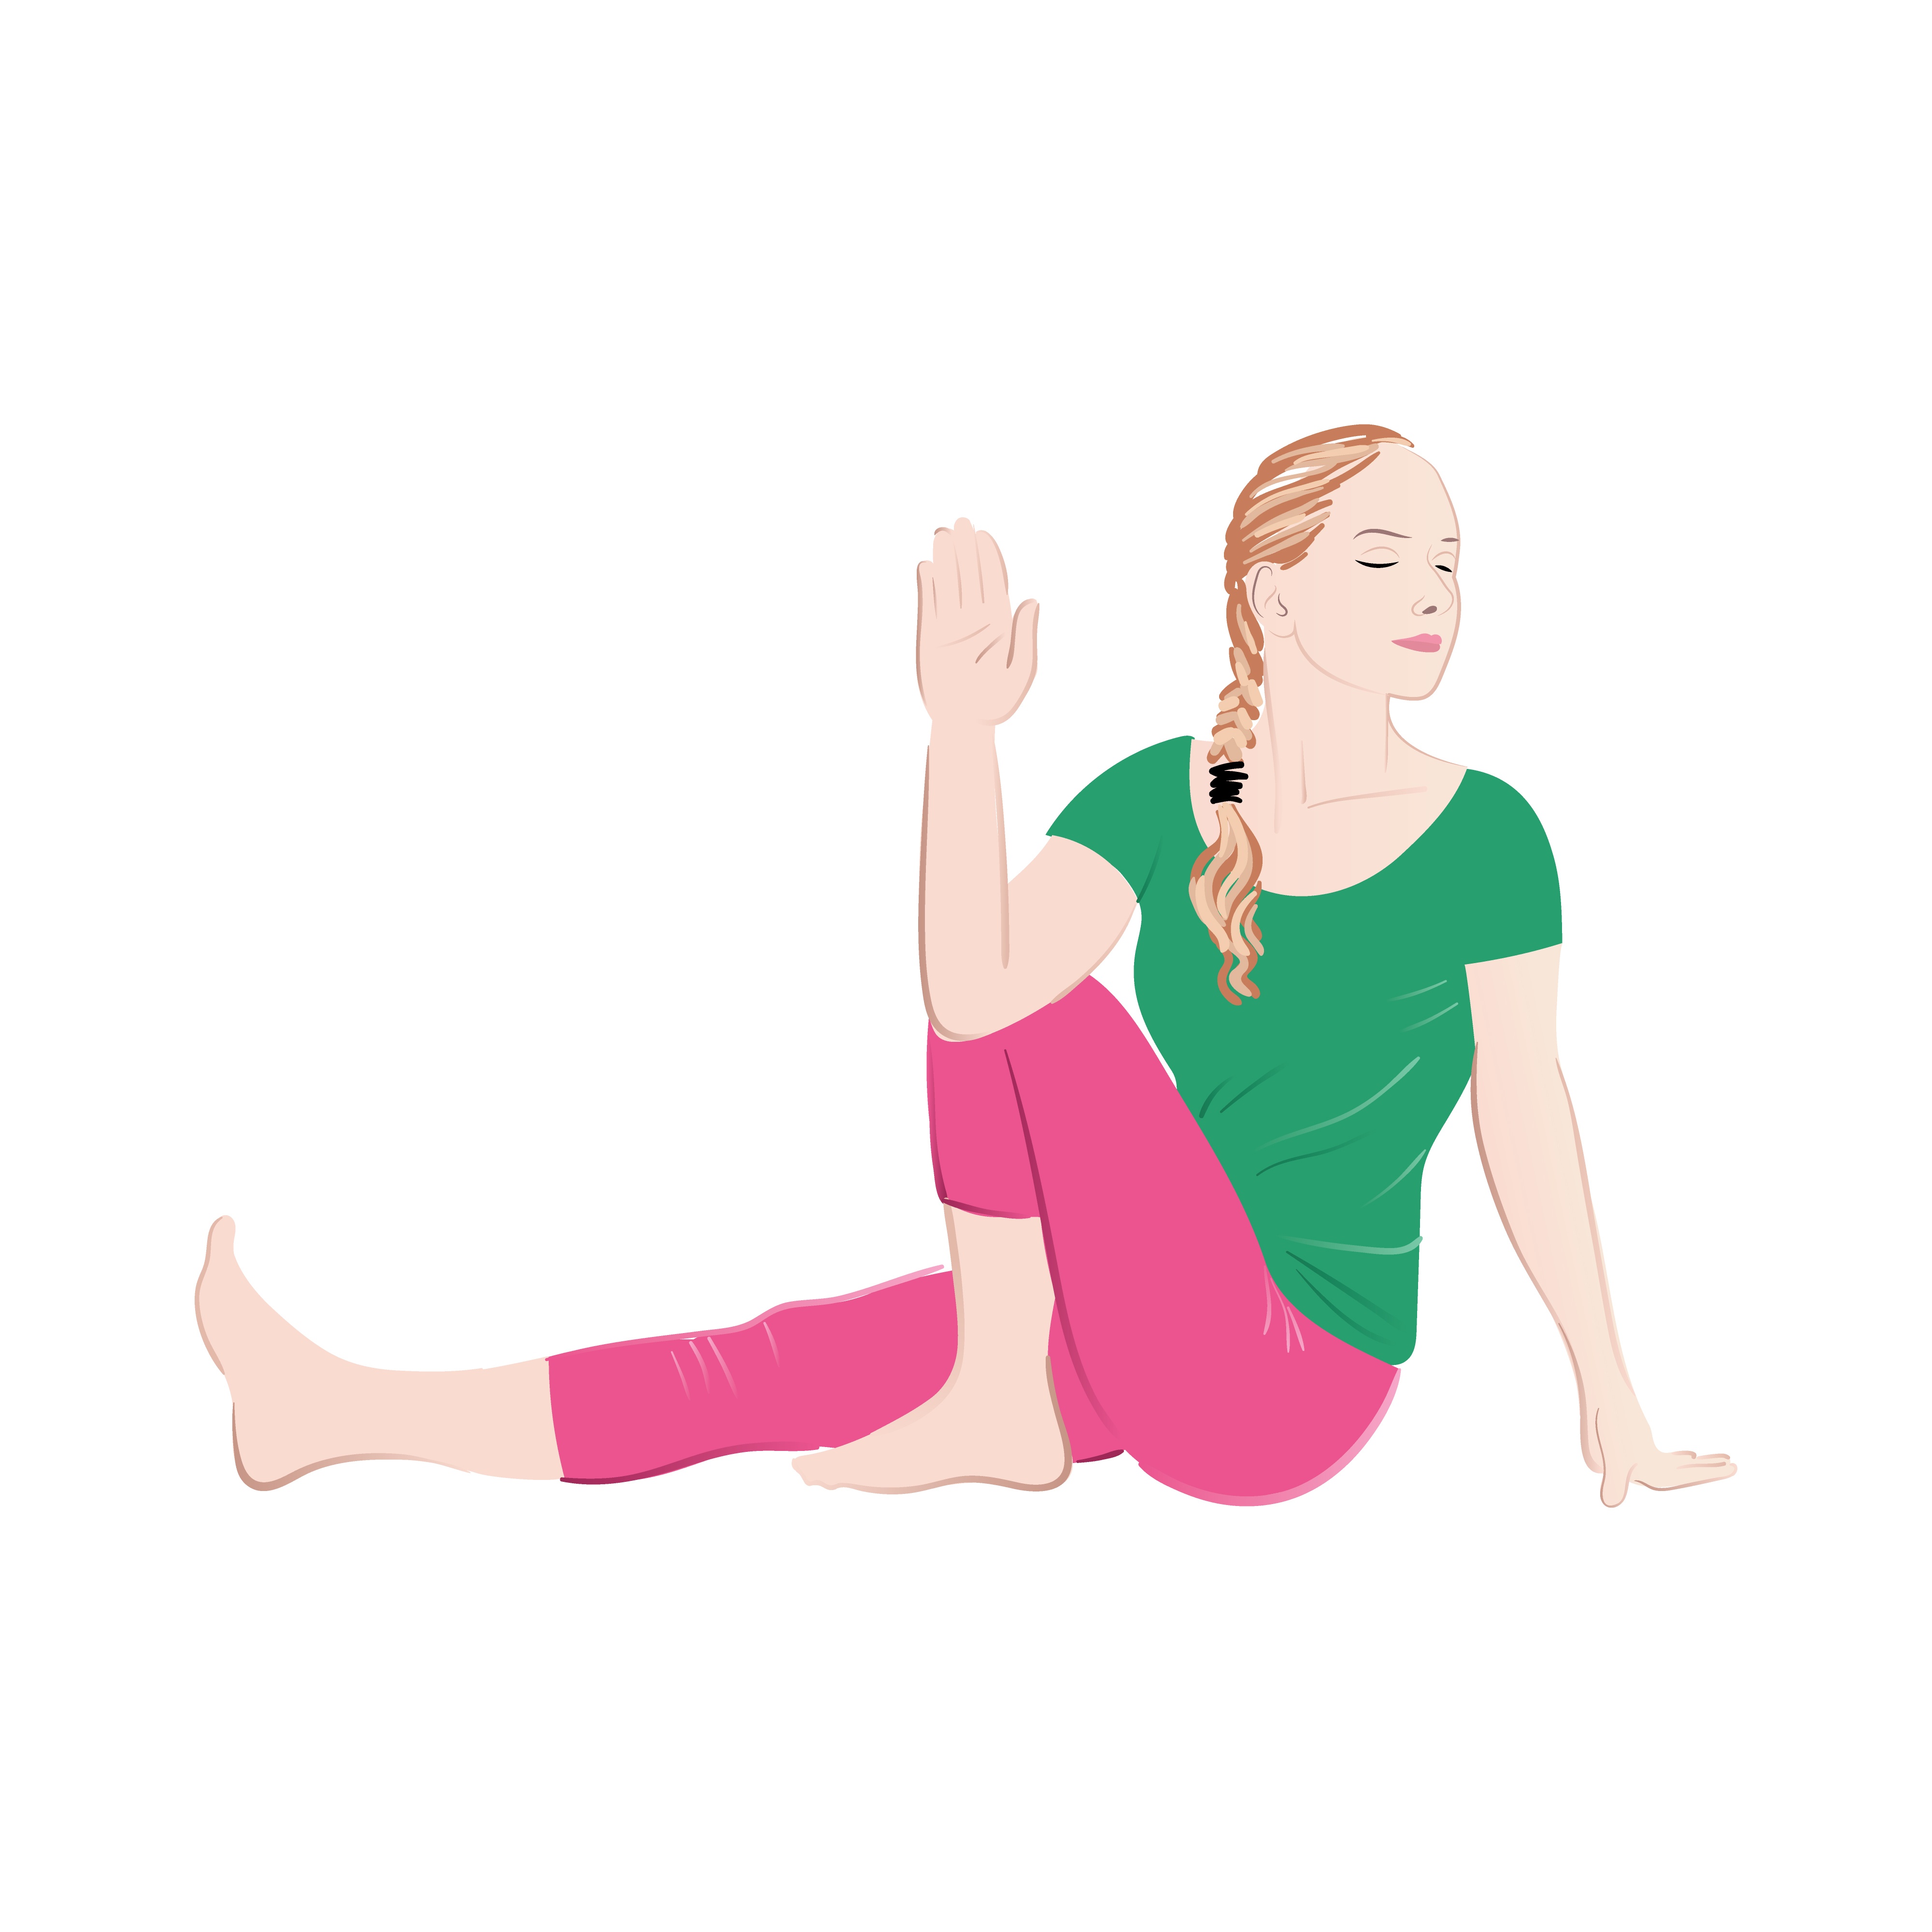 Vakrasana, also known as Twisted Pose or Half Spinal Twist, is a yoga asana  that involves twisting the spine while seated. This pose offers… | Instagram